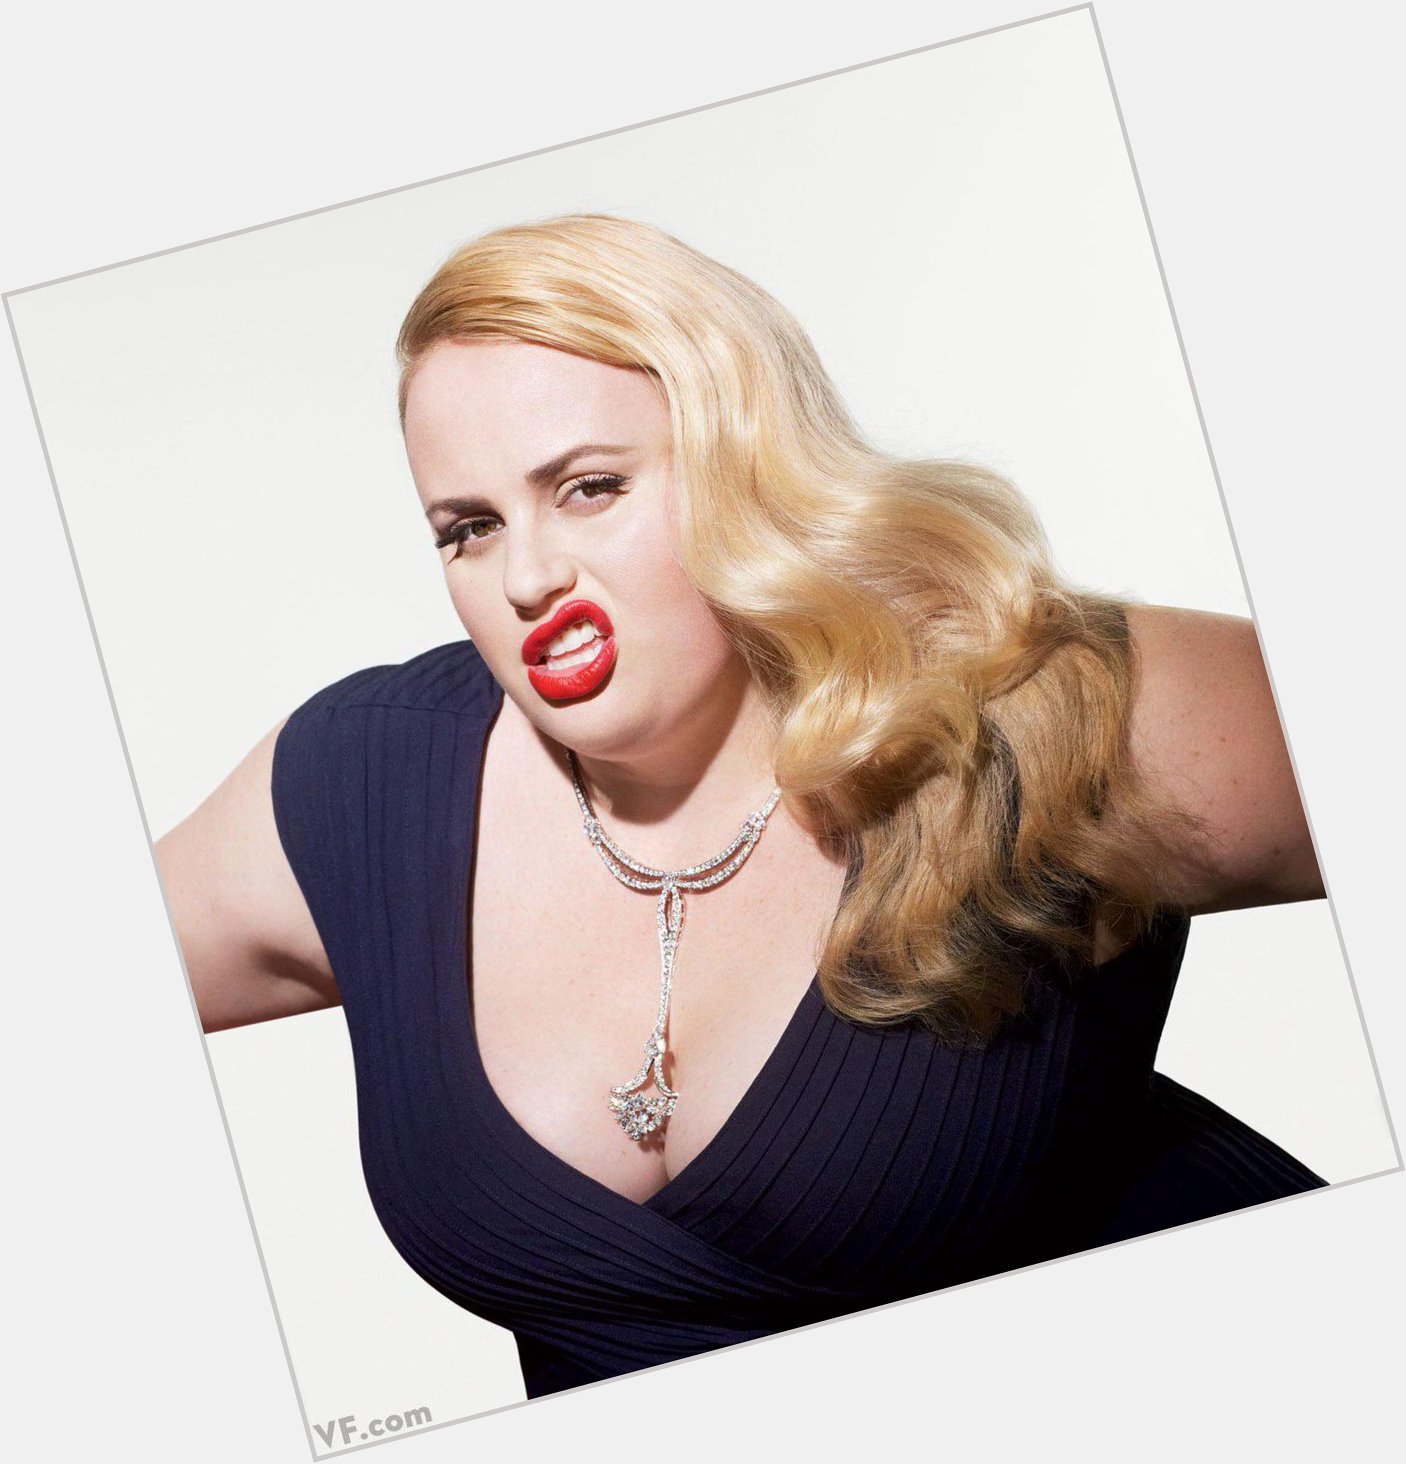 Happy Birthday to Rebel Wilson, who turns 29 today! 